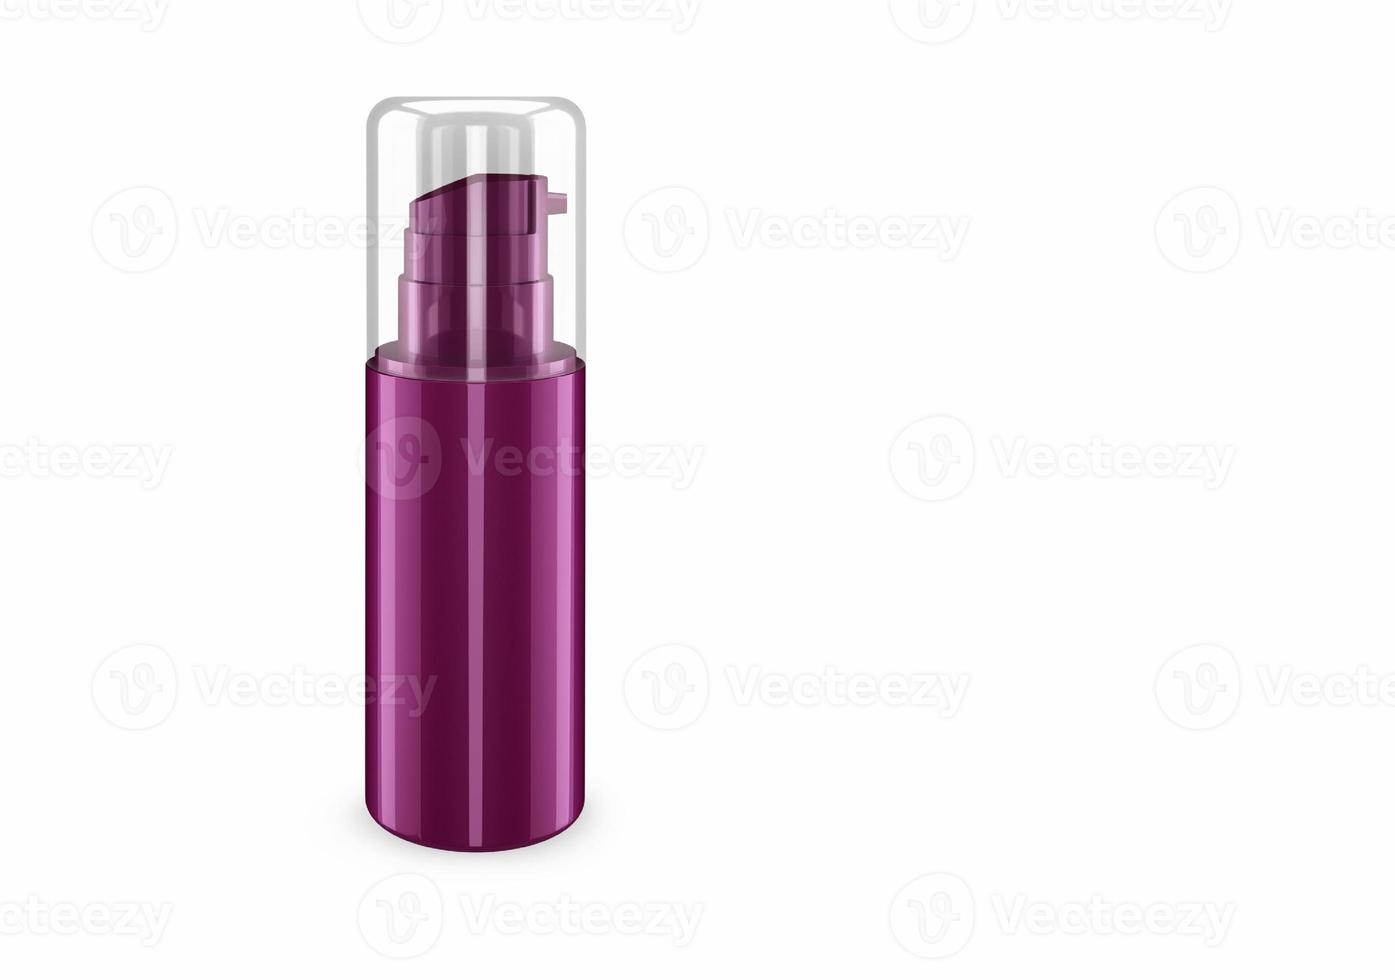 Deep lilac nacre spray bootle mockup isolated from background  shampoo plastic bootle package design. Blank hygiene, medical, body or facial care template. 3d illustration photo